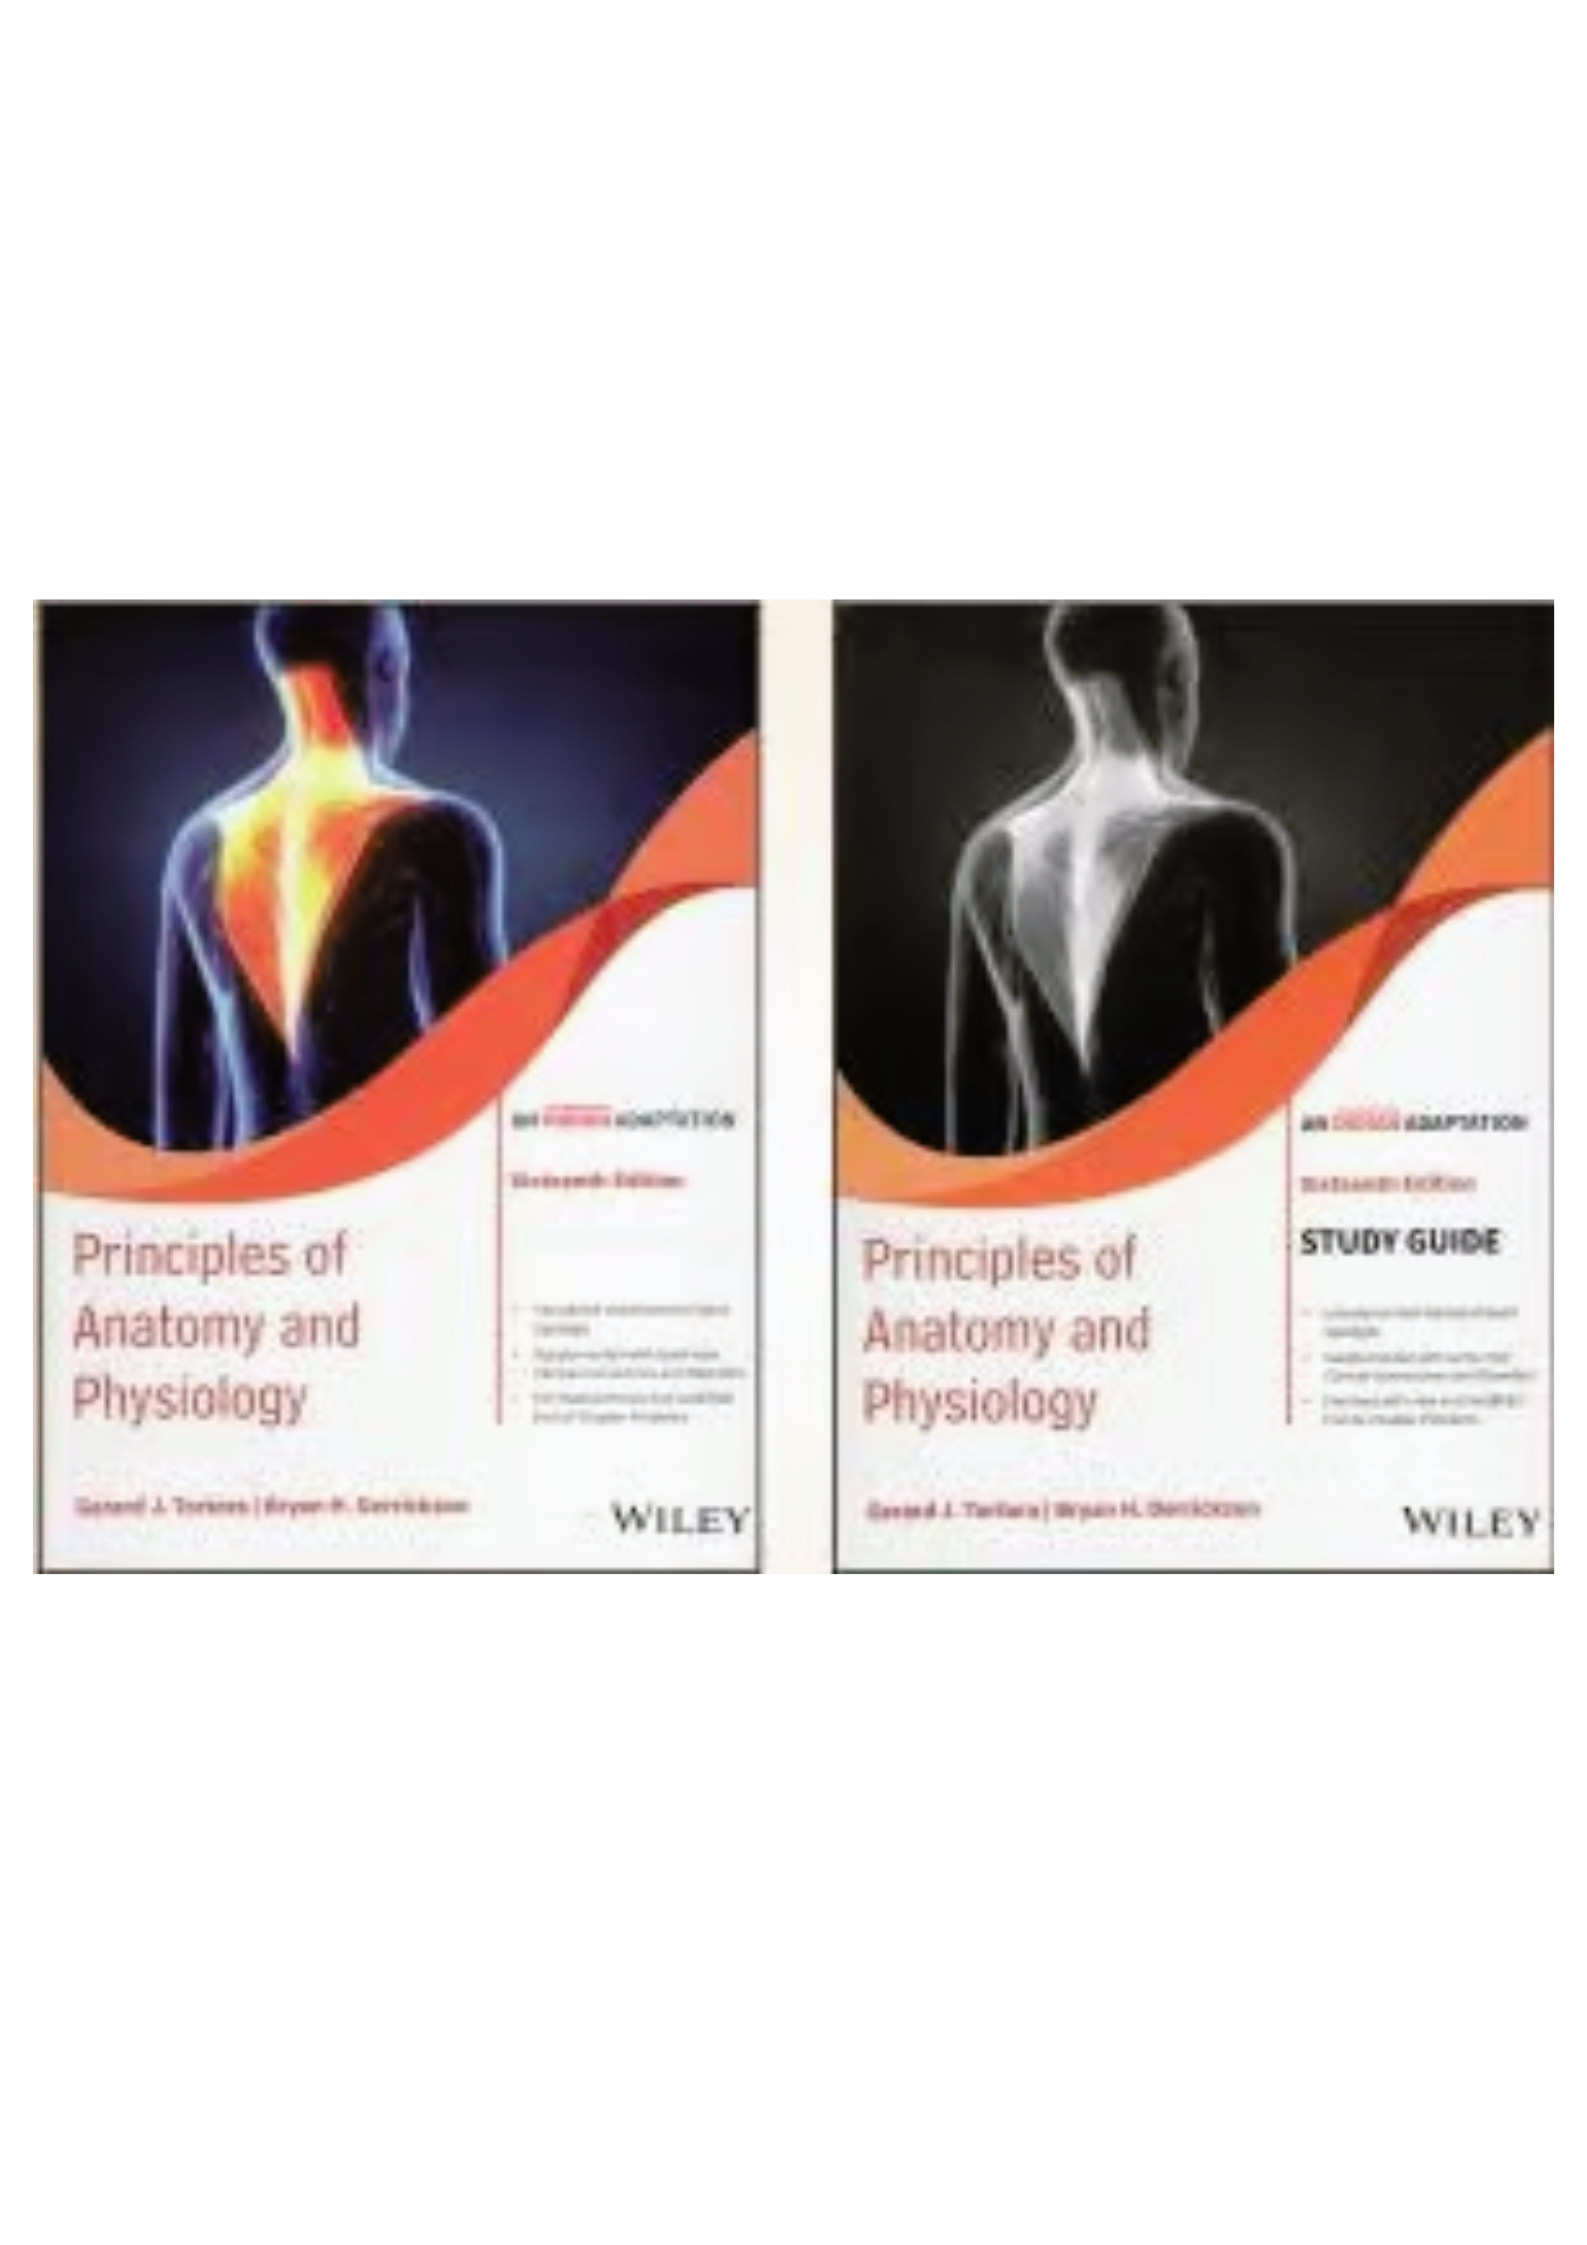 by　Anatomy　Prithvi　Book　J　Of　Textbook　Gerard　Edition　Guide　And　Global　Study　Tortora　Physiology　And　Tortoras　Store　Principles　Medical